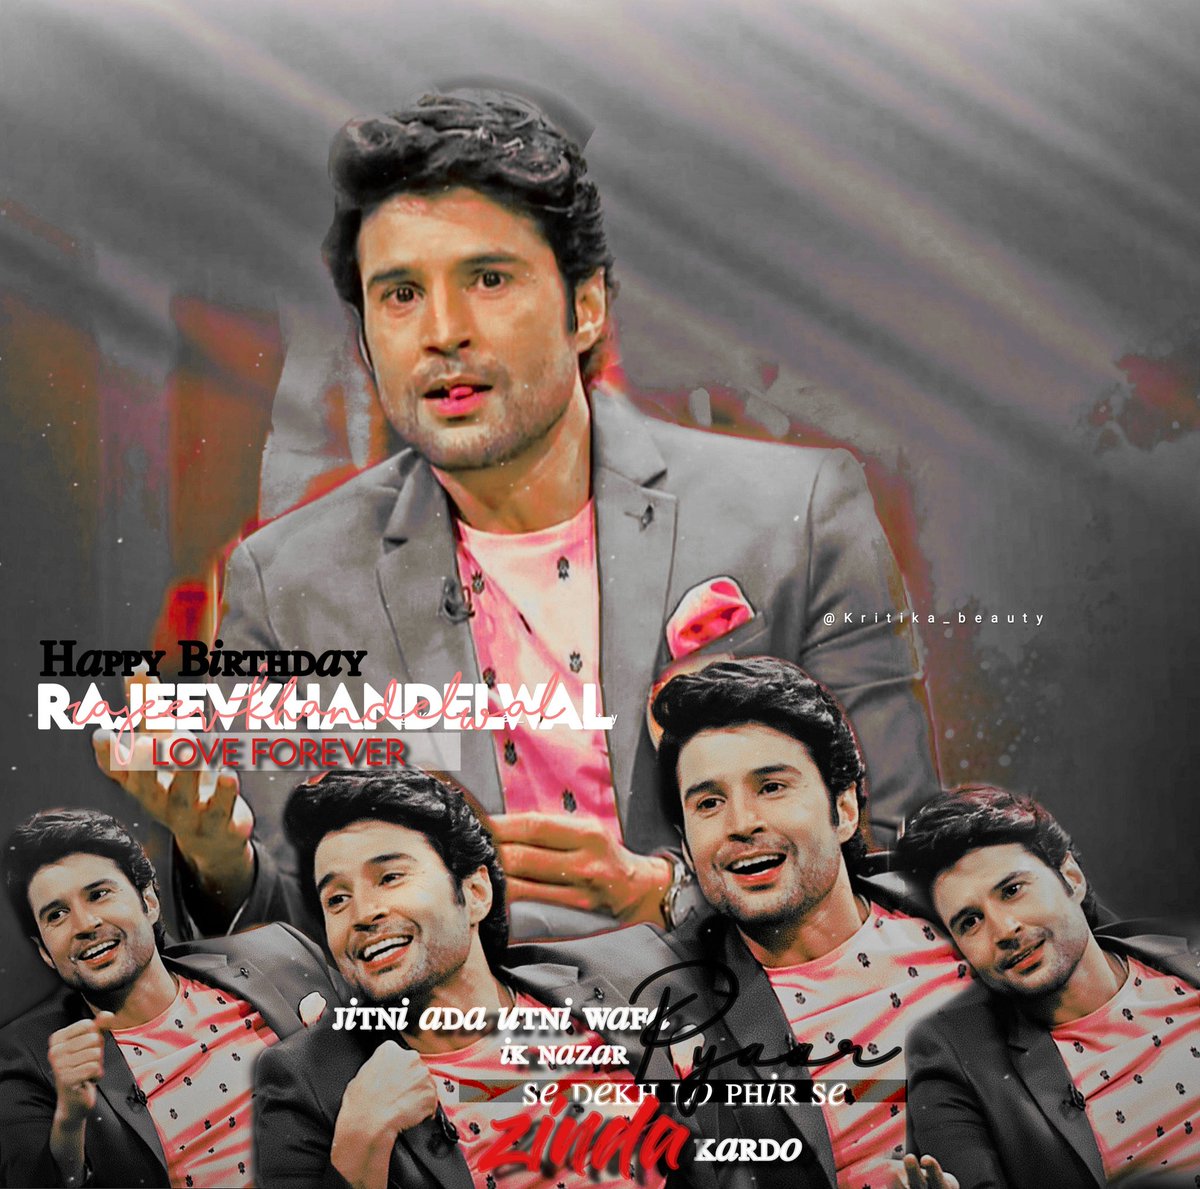 You're so special to me that one greeting for your B'day is not enough... So... Advance Happy Birthday Hero #RajeevKhandelwal #HBDRajeevKhandelwal #HappyBirthdayRajeevKhandelwal #15DaysToGo( P.S : Dedicated to  @ALilBitOfHoney )